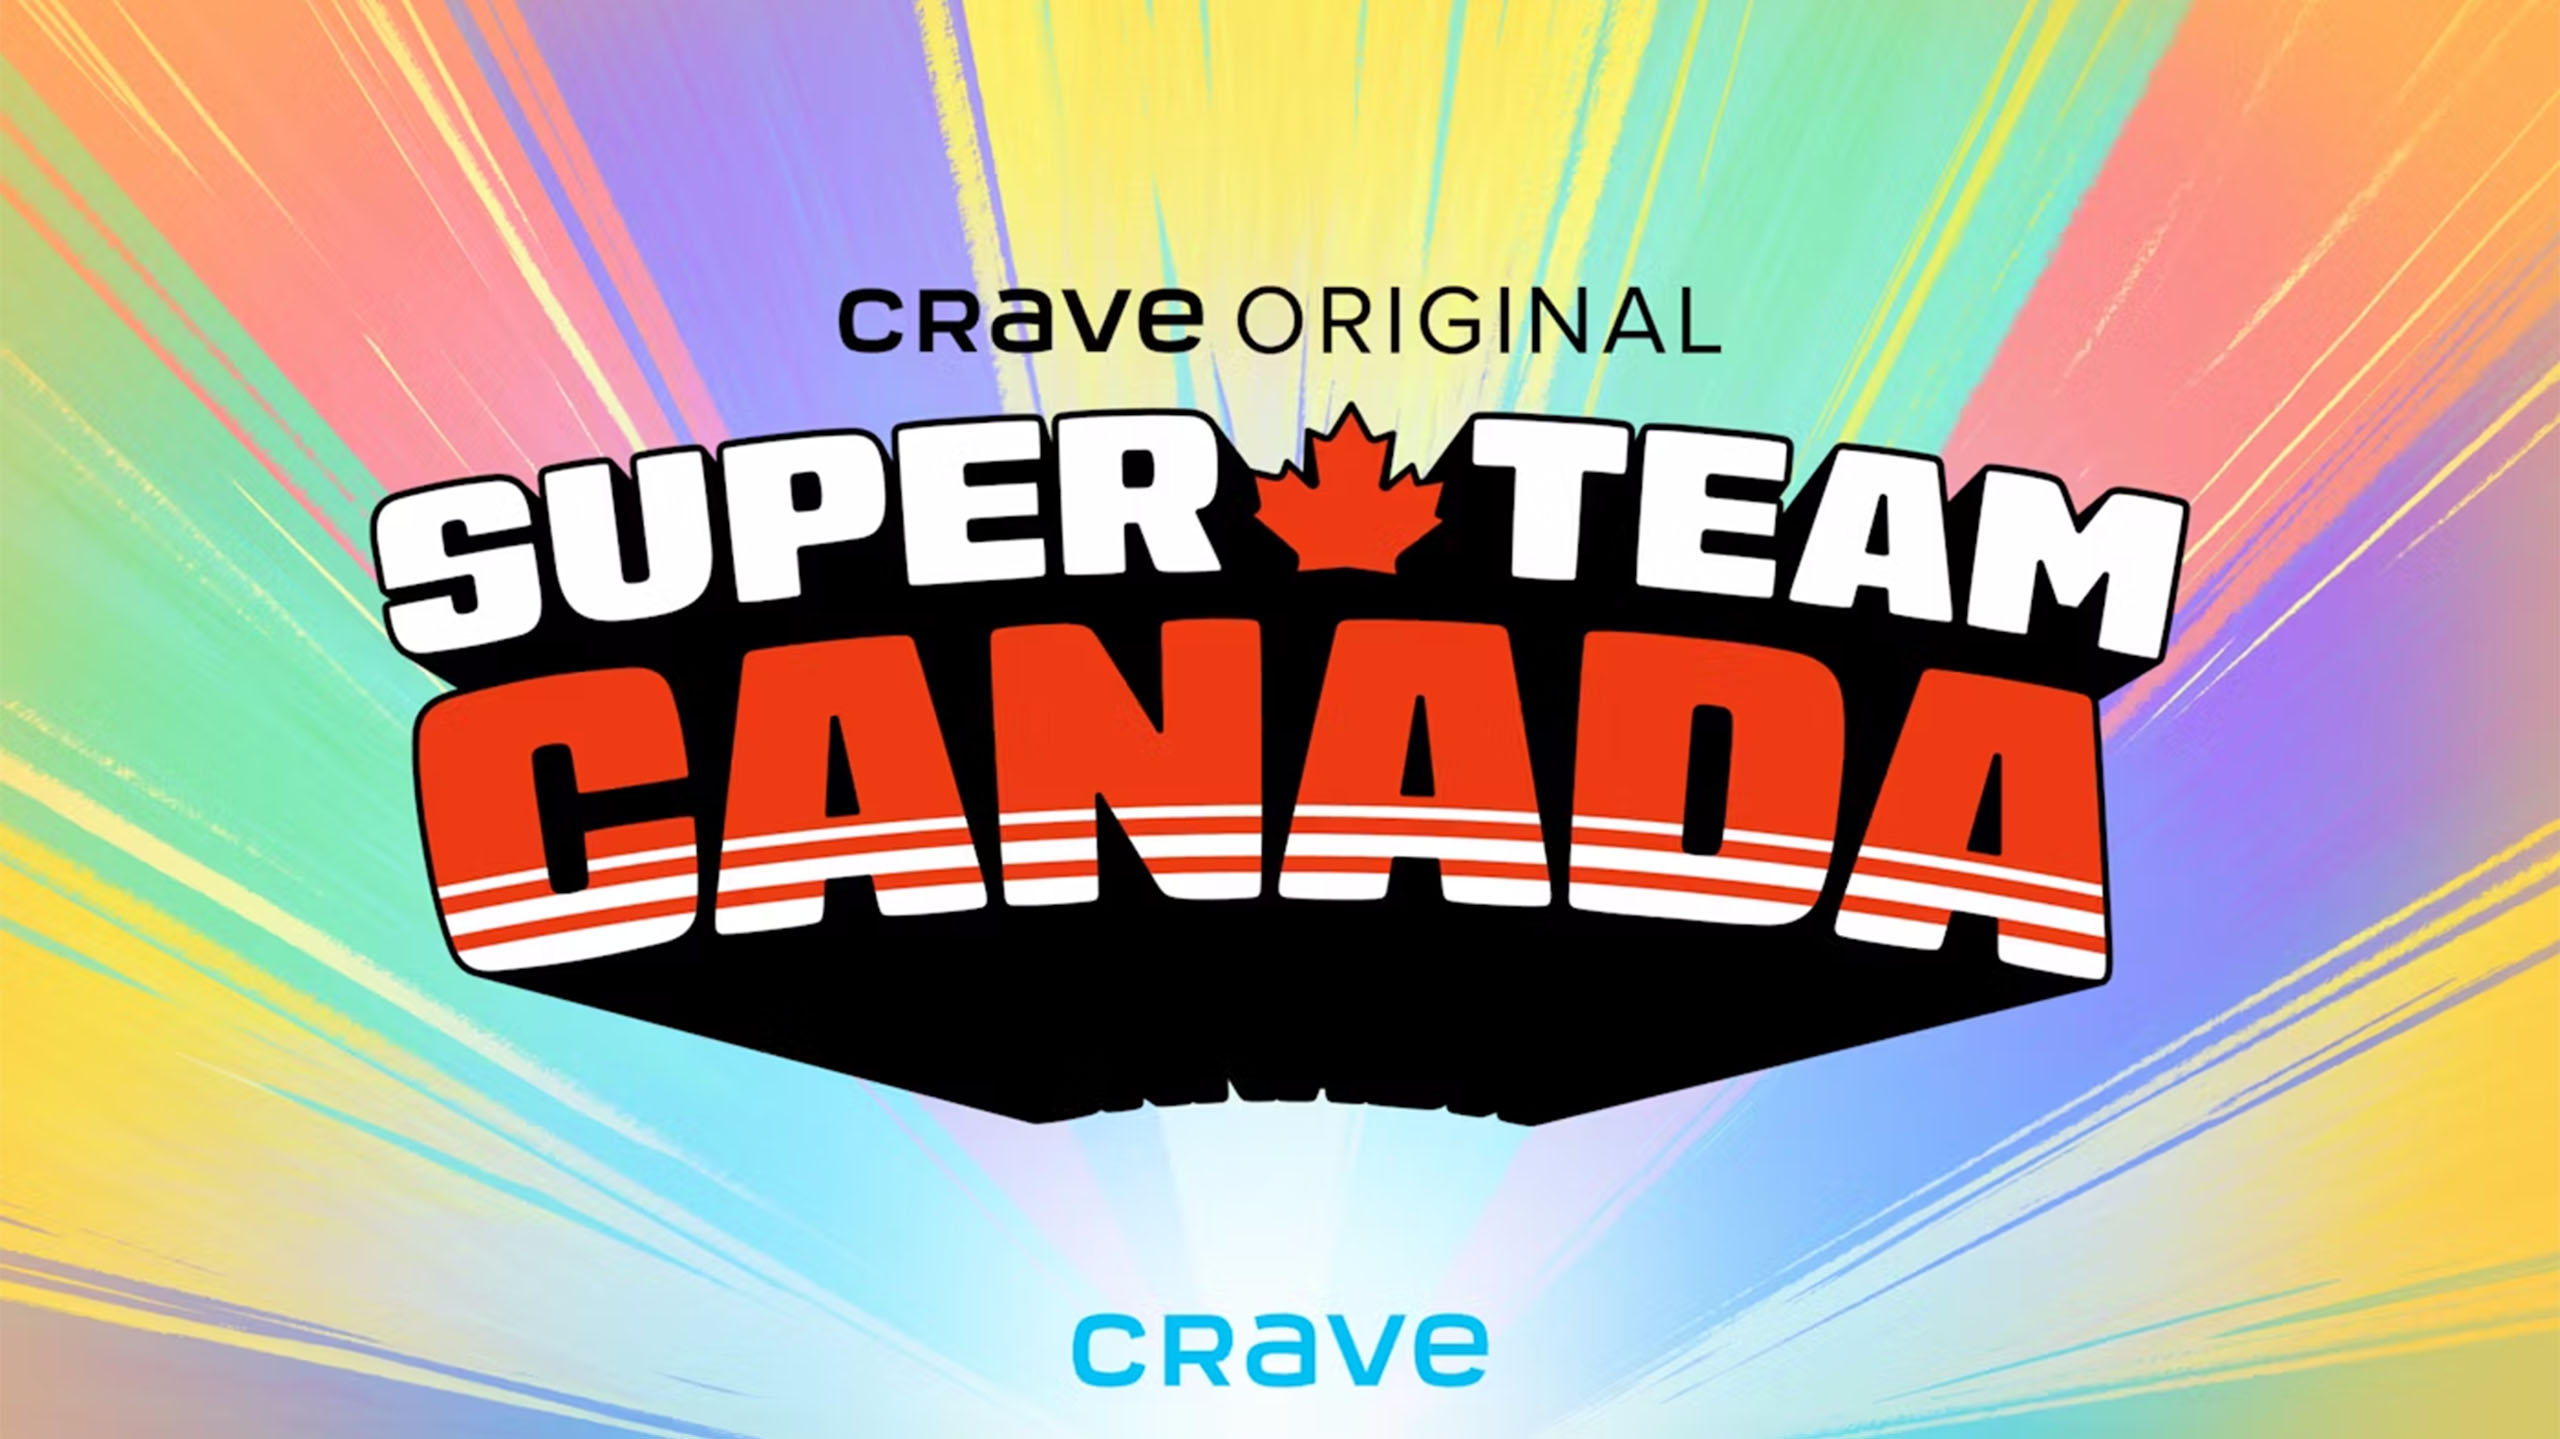 The Super Team Canada logo on a colourful background with the Crave logo.